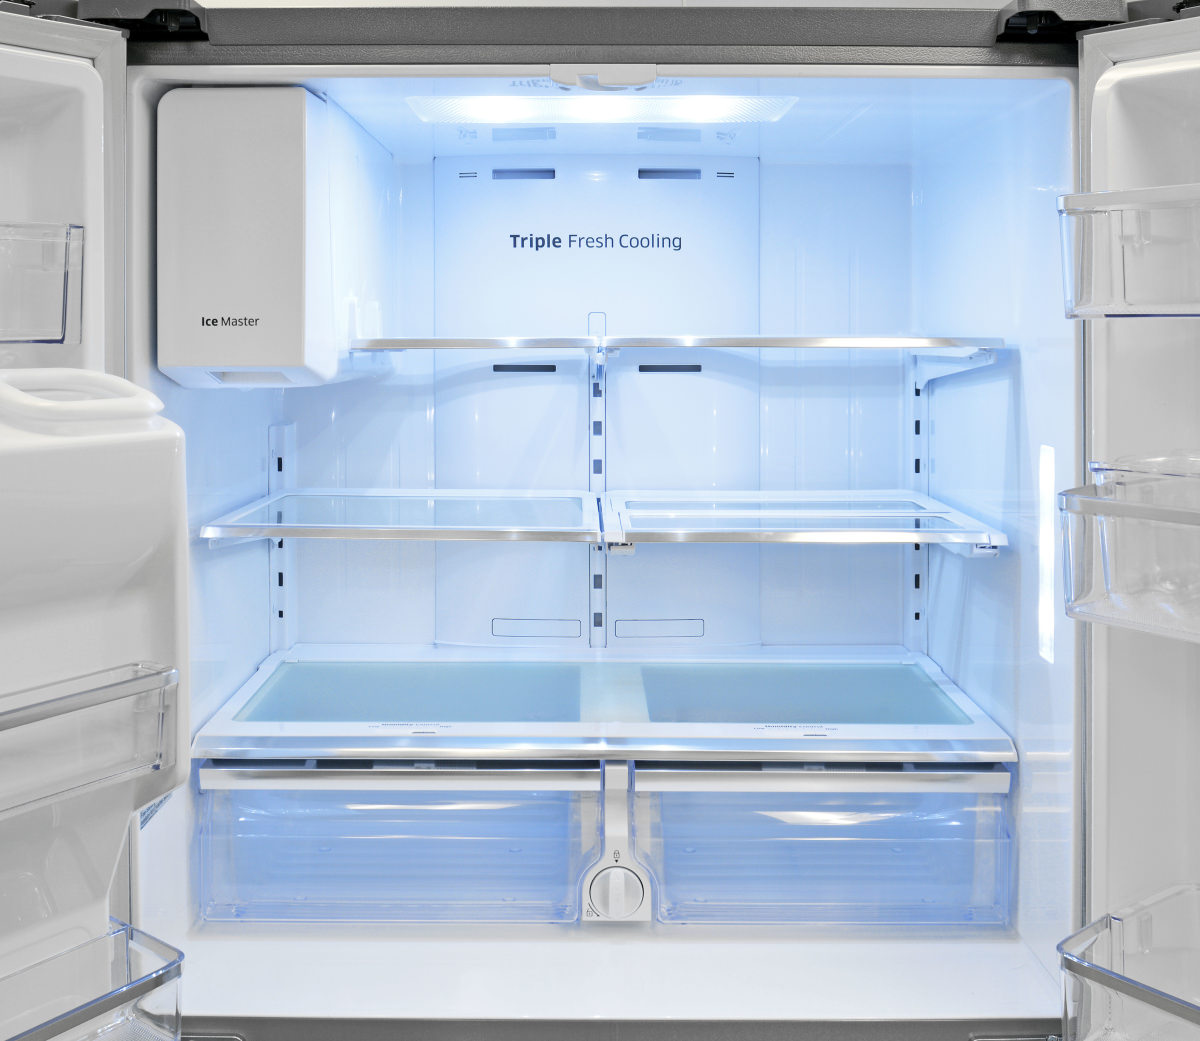 Why are some Samsung fridges more expensive than others?